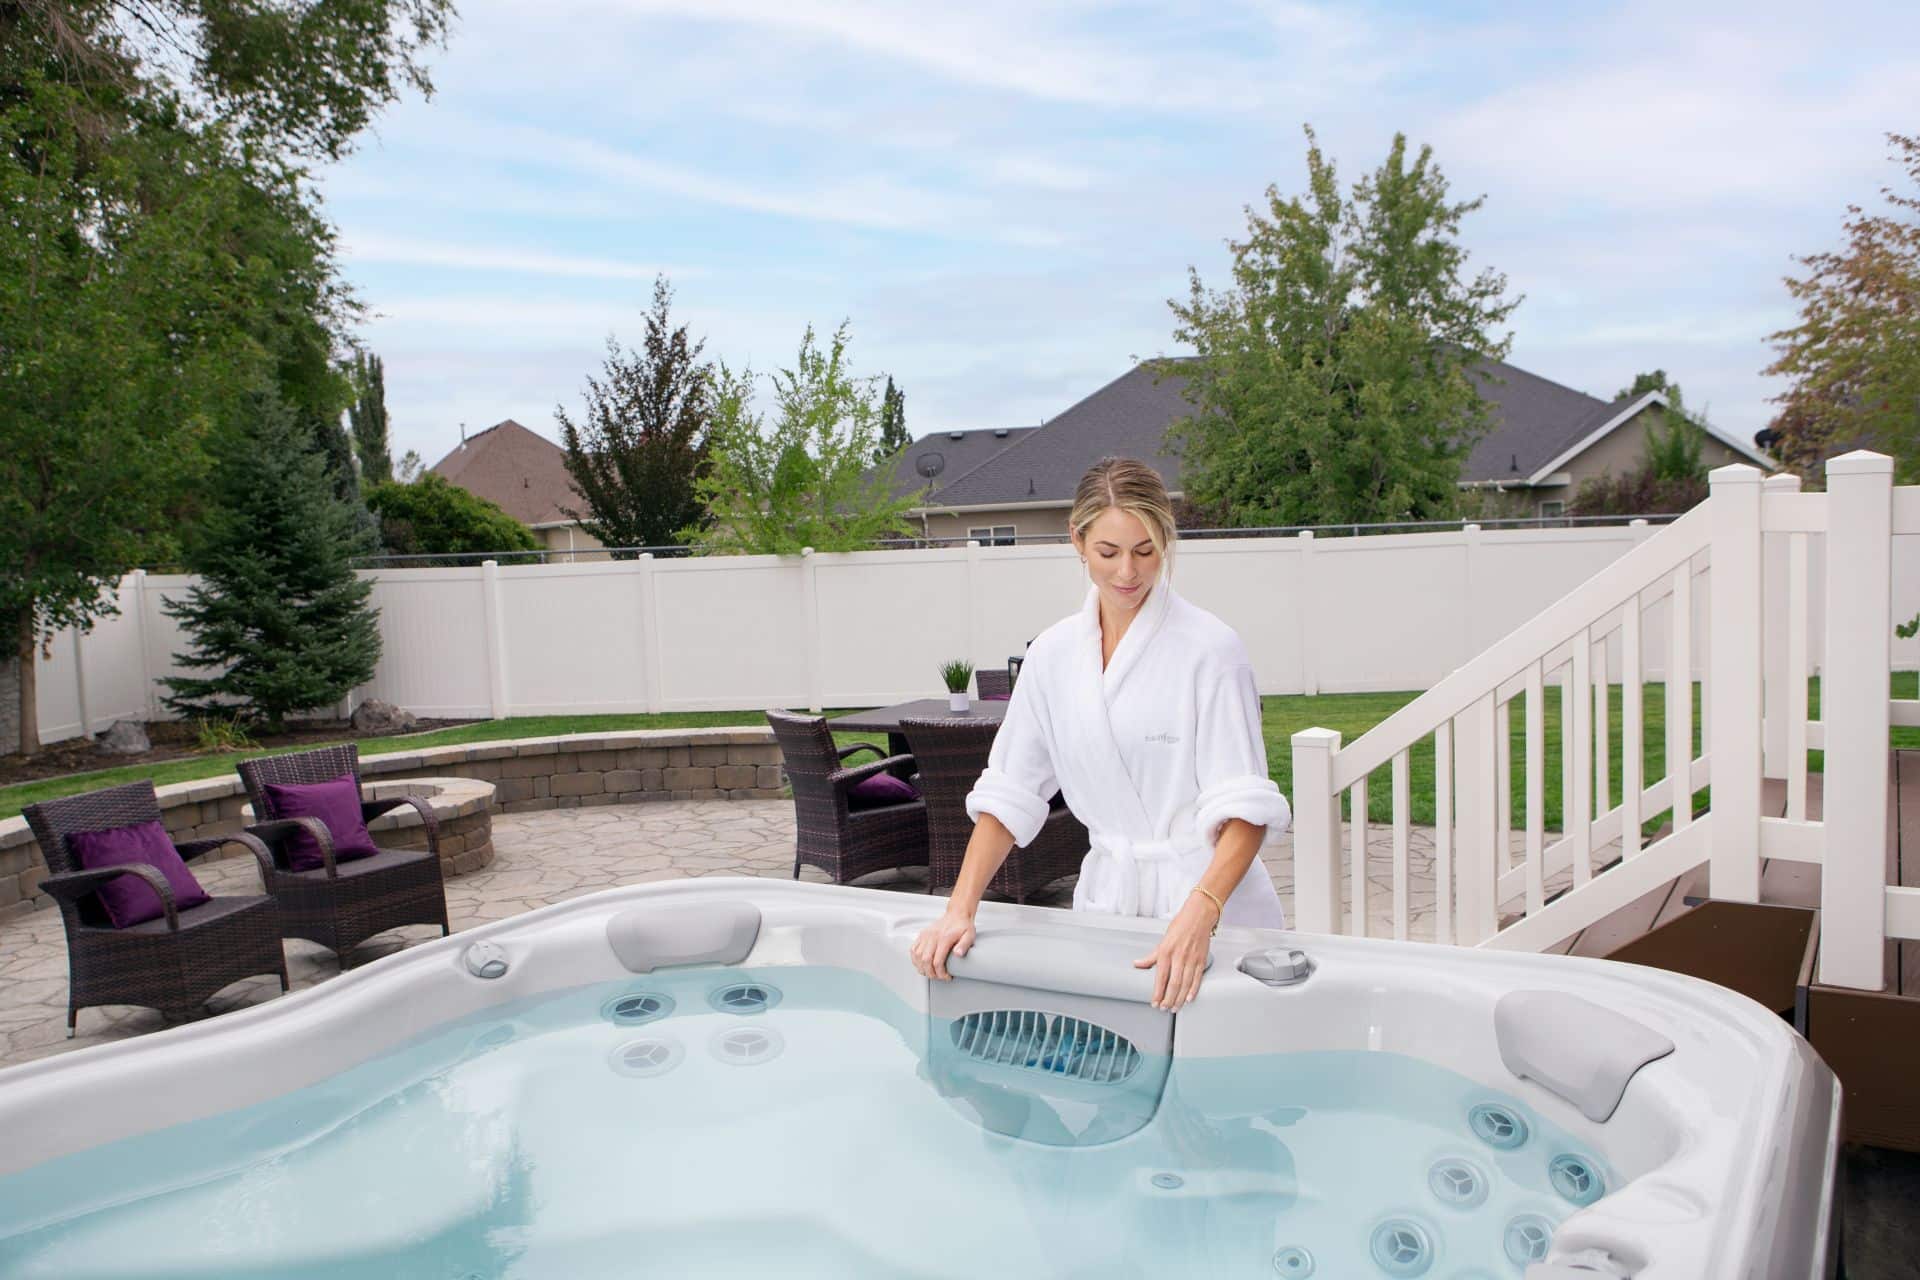 woman adjusting the filter on a hot tub